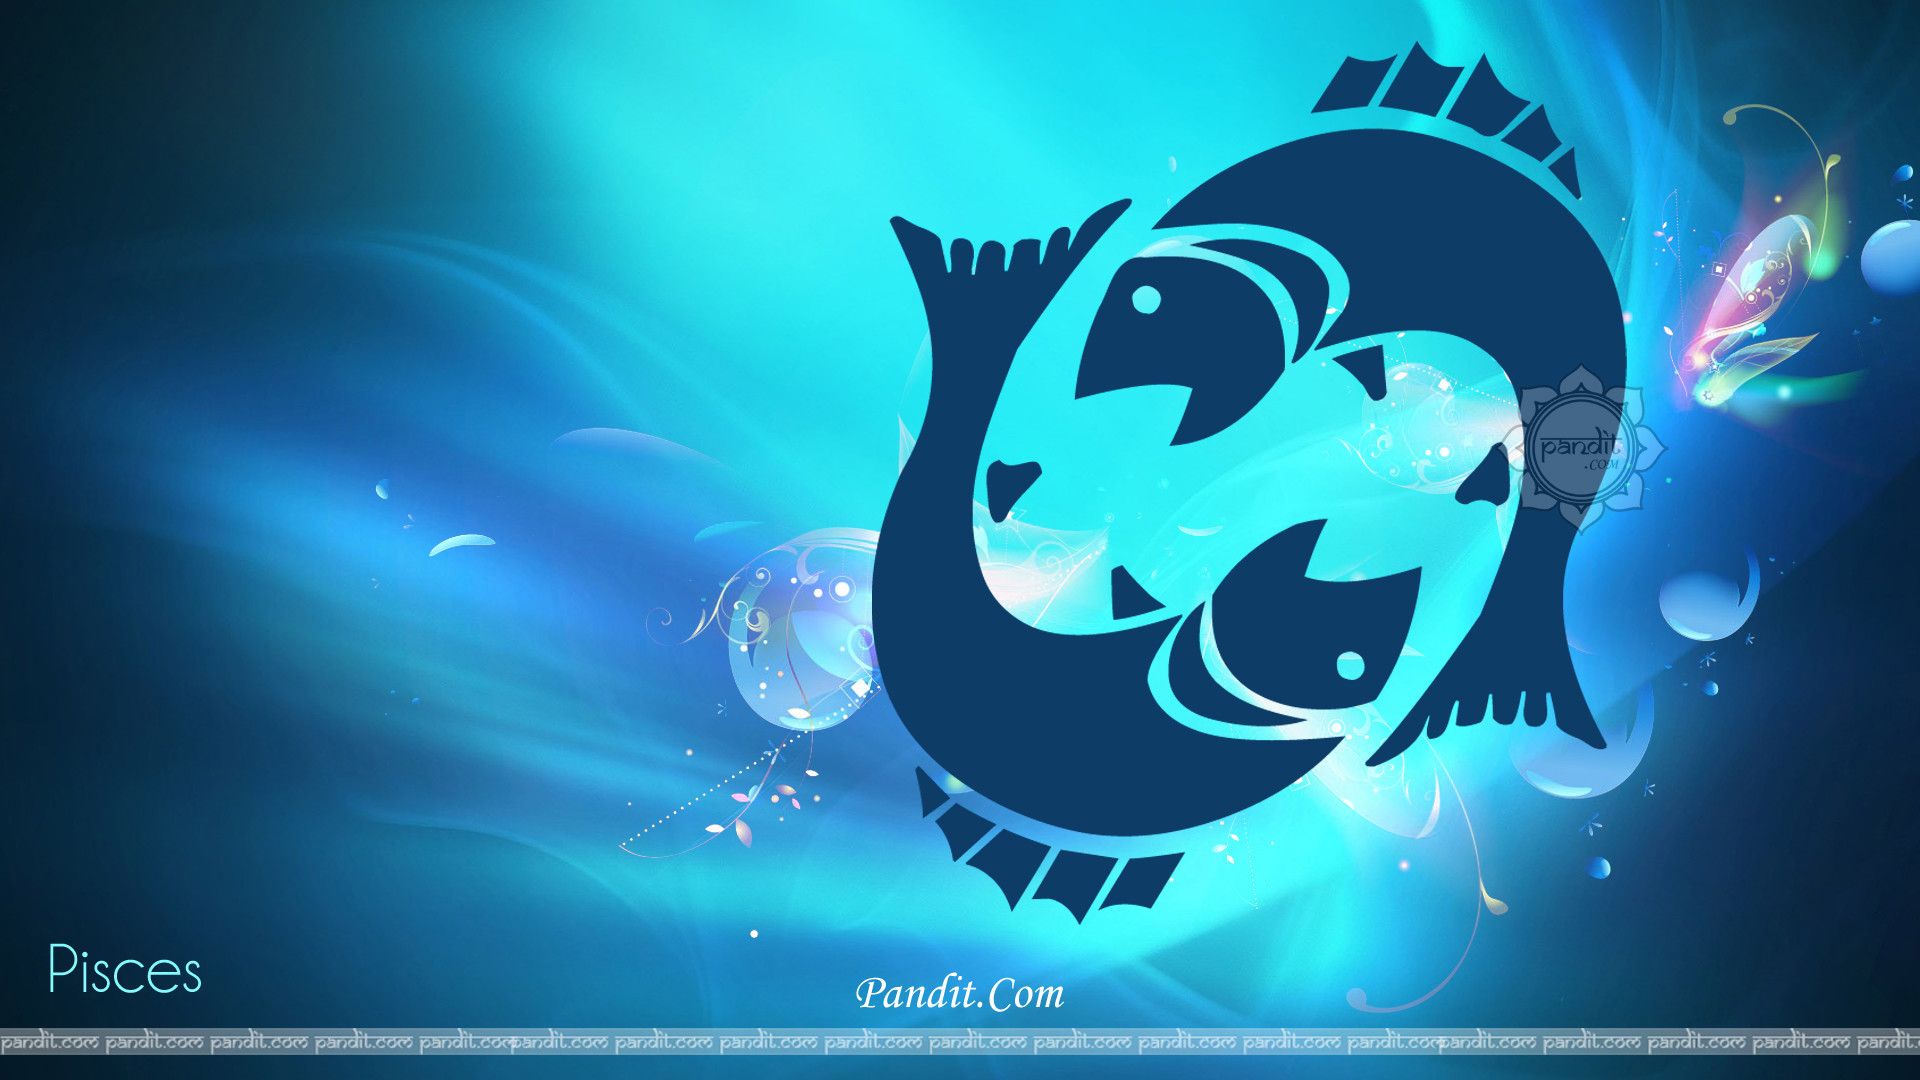 Pisces Wallpaper background picture